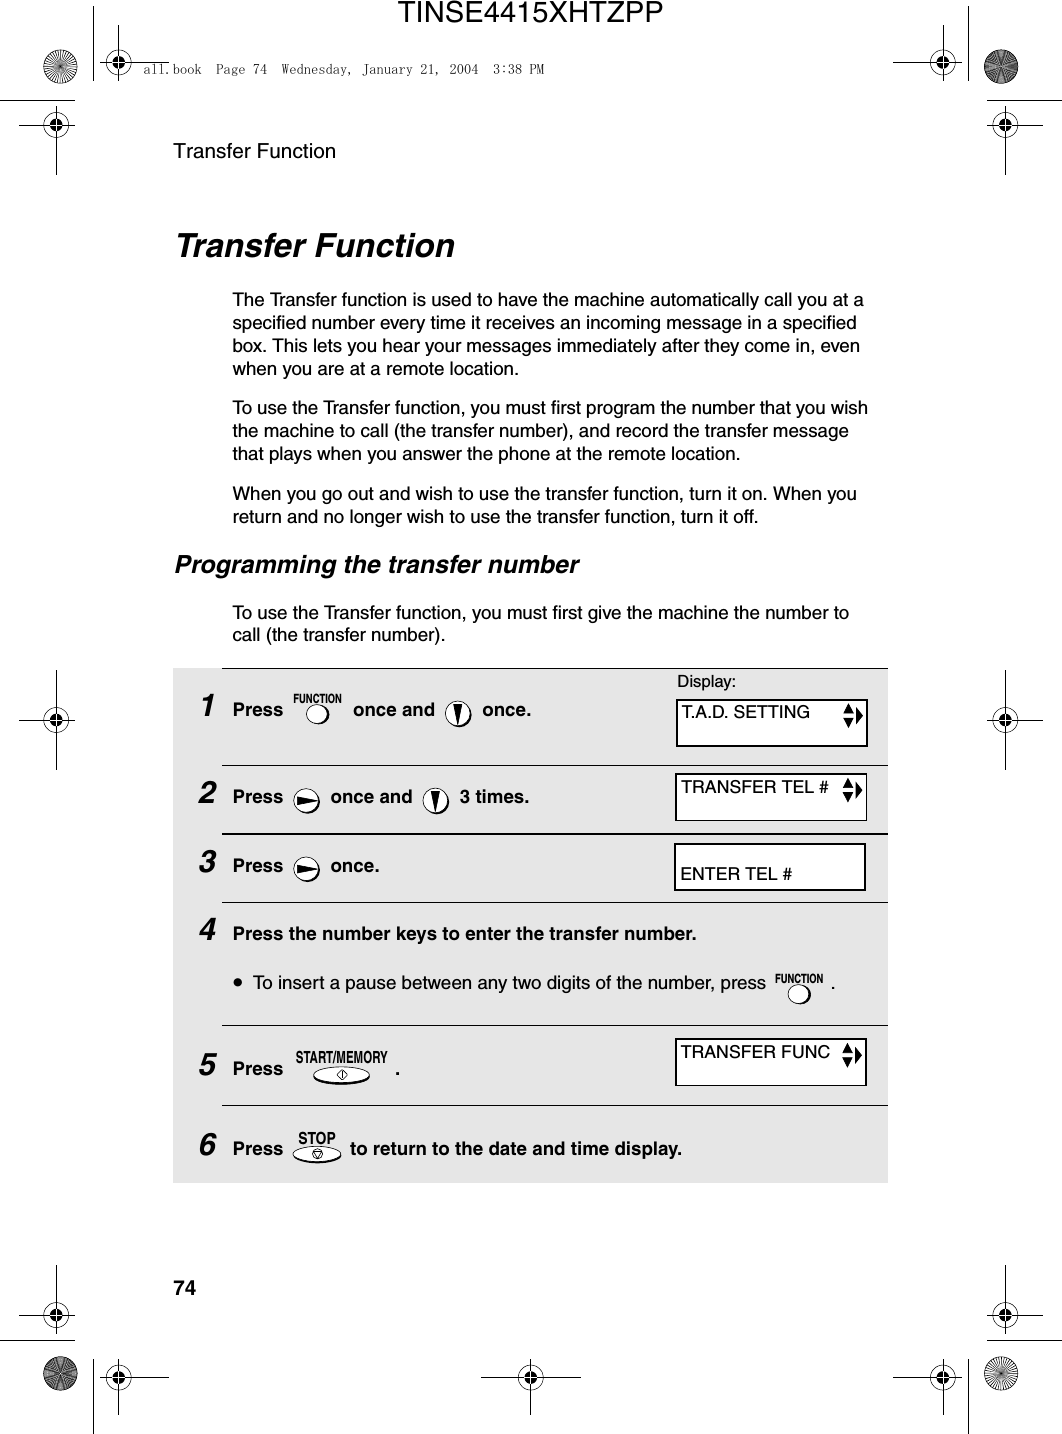 Transfer Function74Transfer FunctionThe Transfer function is used to have the machine automatically call you at a specified number every time it receives an incoming message in a specified box. This lets you hear your messages immediately after they come in, even when you are at a remote location.To use the Transfer function, you must first program the number that you wish the machine to call (the transfer number), and record the transfer message that plays when you answer the phone at the remote location.When you go out and wish to use the transfer function, turn it on. When you return and no longer wish to use the transfer function, turn it off.Programming the transfer numberTo use the Transfer function, you must first give the machine the number to call (the transfer number). 1Press   once and   once.2Press   once and   3 times.3Press  once.4Press the number keys to enter the transfer number.•To insert a pause between any two digits of the number, press  .5Press .6Press   to return to the date and time display.FUNCTIONFUNCTIONSTART/MEMORYSTOPDisplay:T.A.D. SETTINGTRANSFER TEL #ENTER TEL #TRANSFER FUNCall.book  Page 74  Wednesday, January 21, 2004  3:38 PMTINSE4415XHTZPP